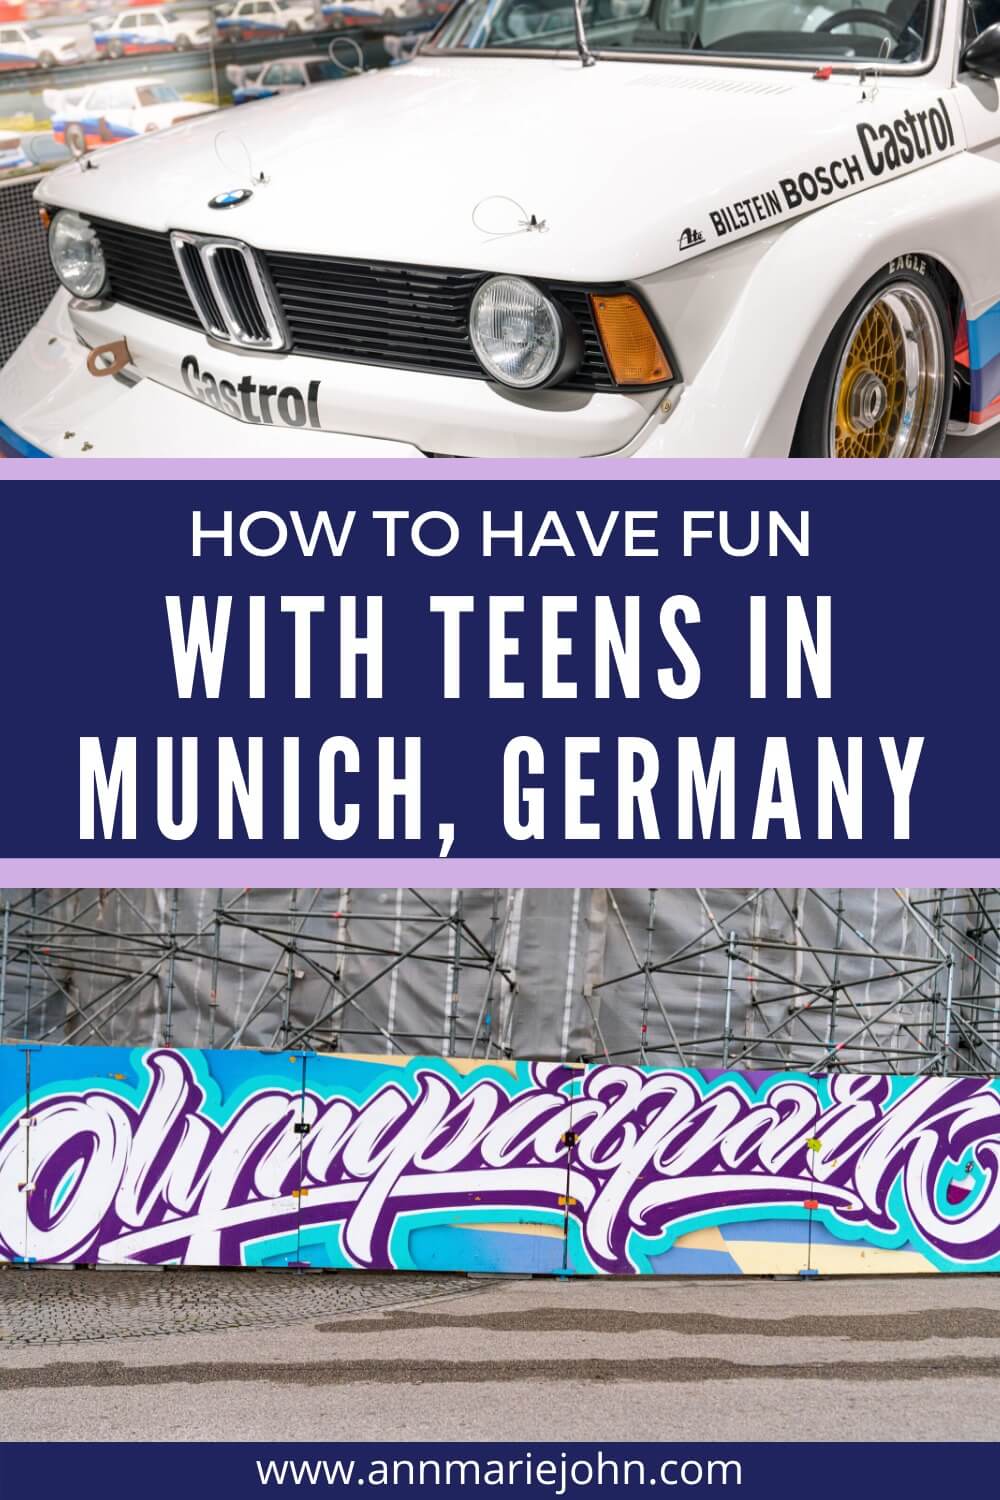 How to Have Fun With Teens inn Munich, Germany